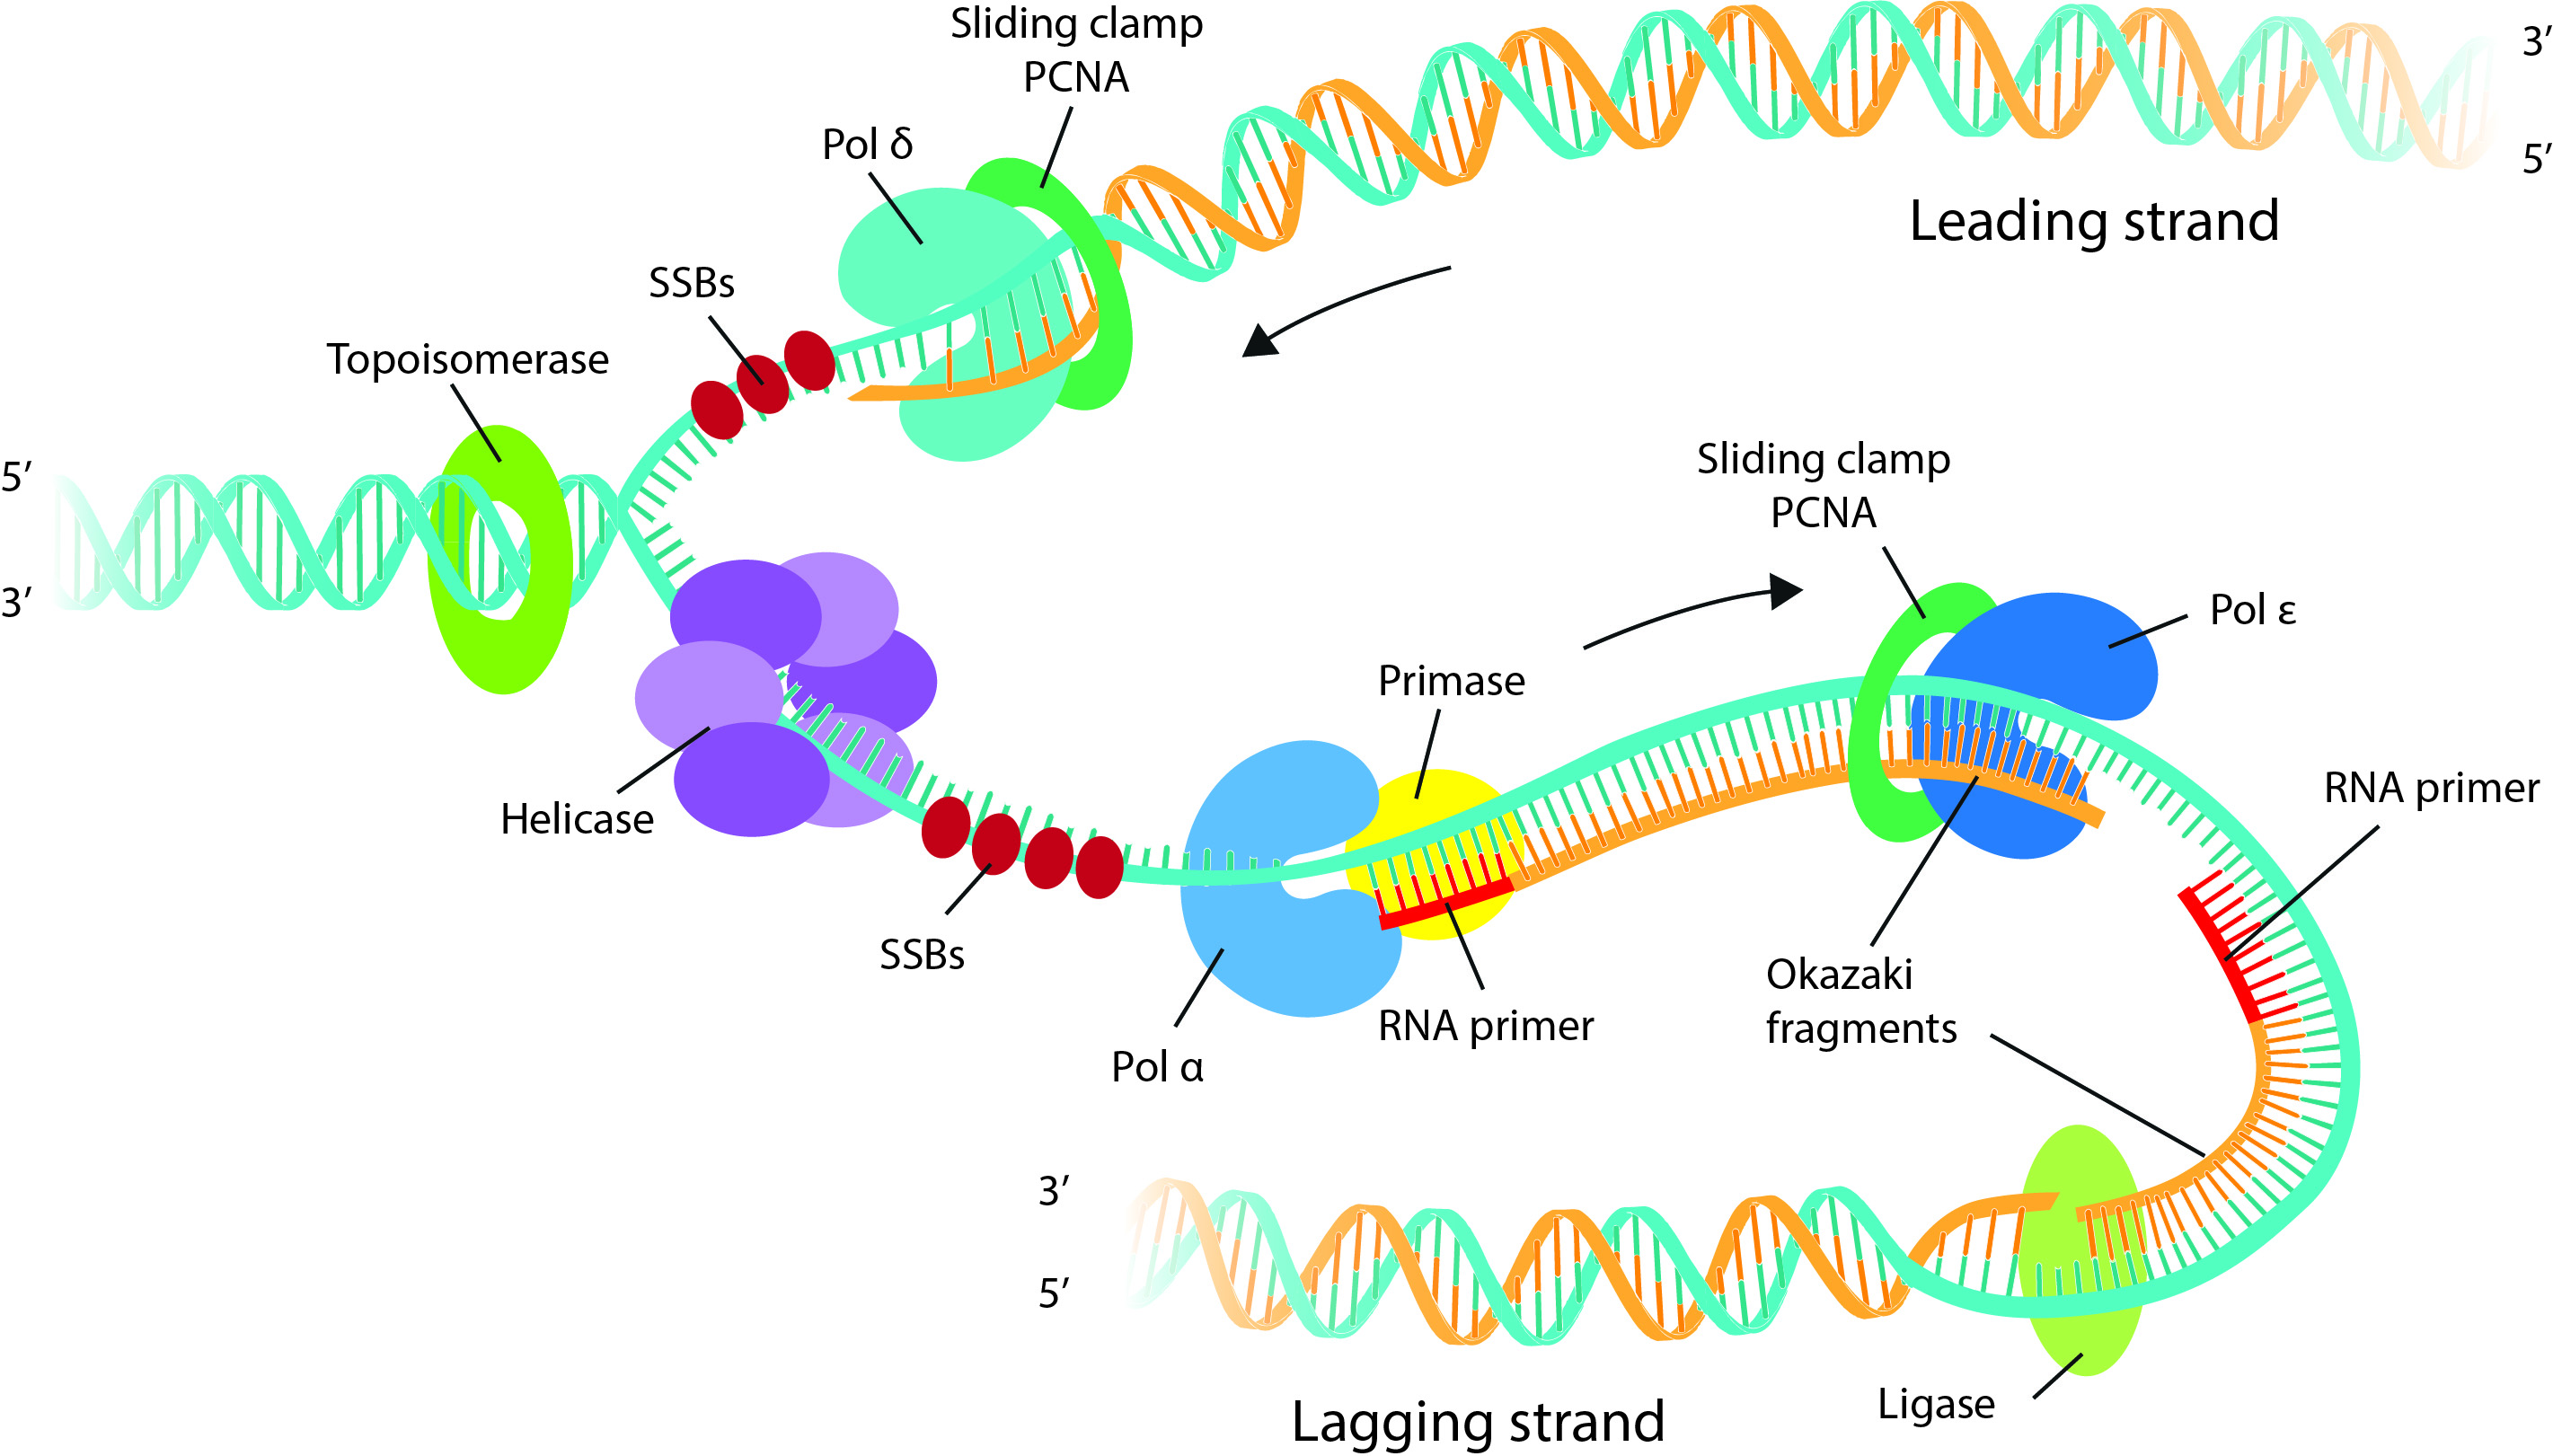 research on dna replication